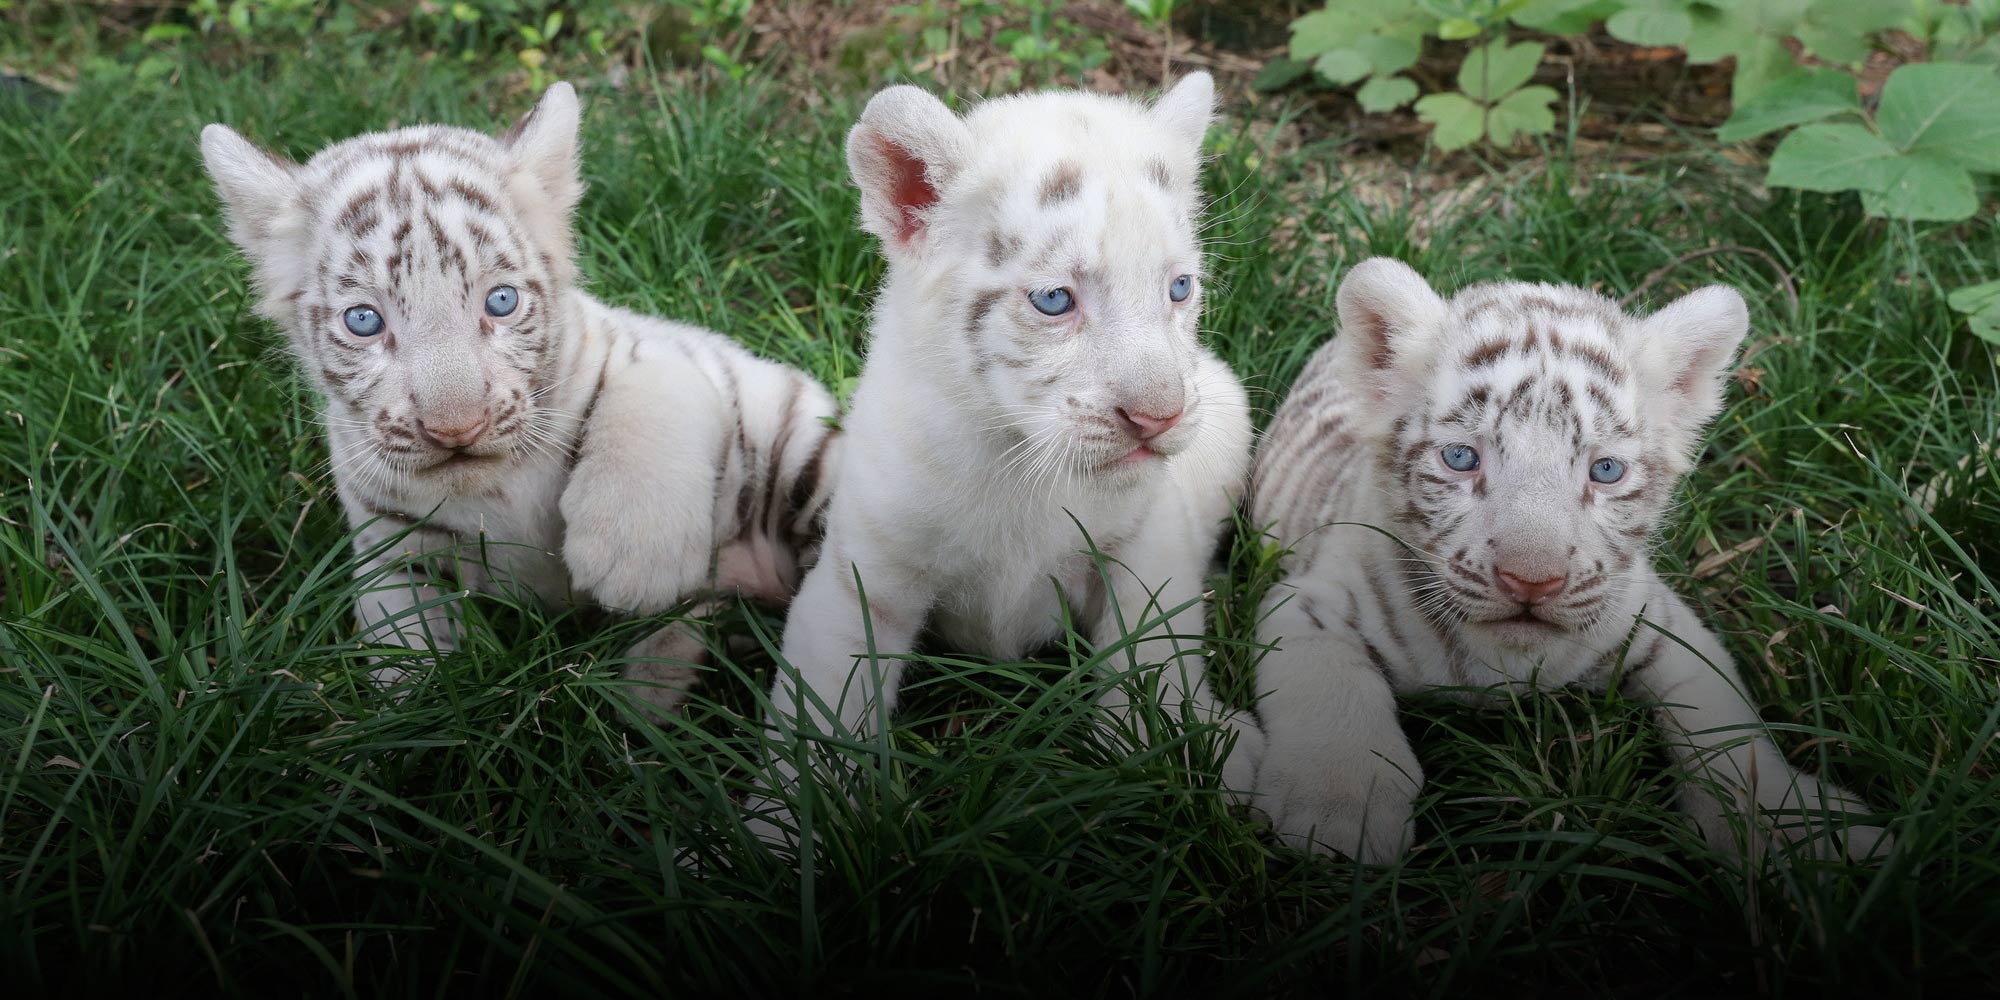 5 things to know about the white tiger